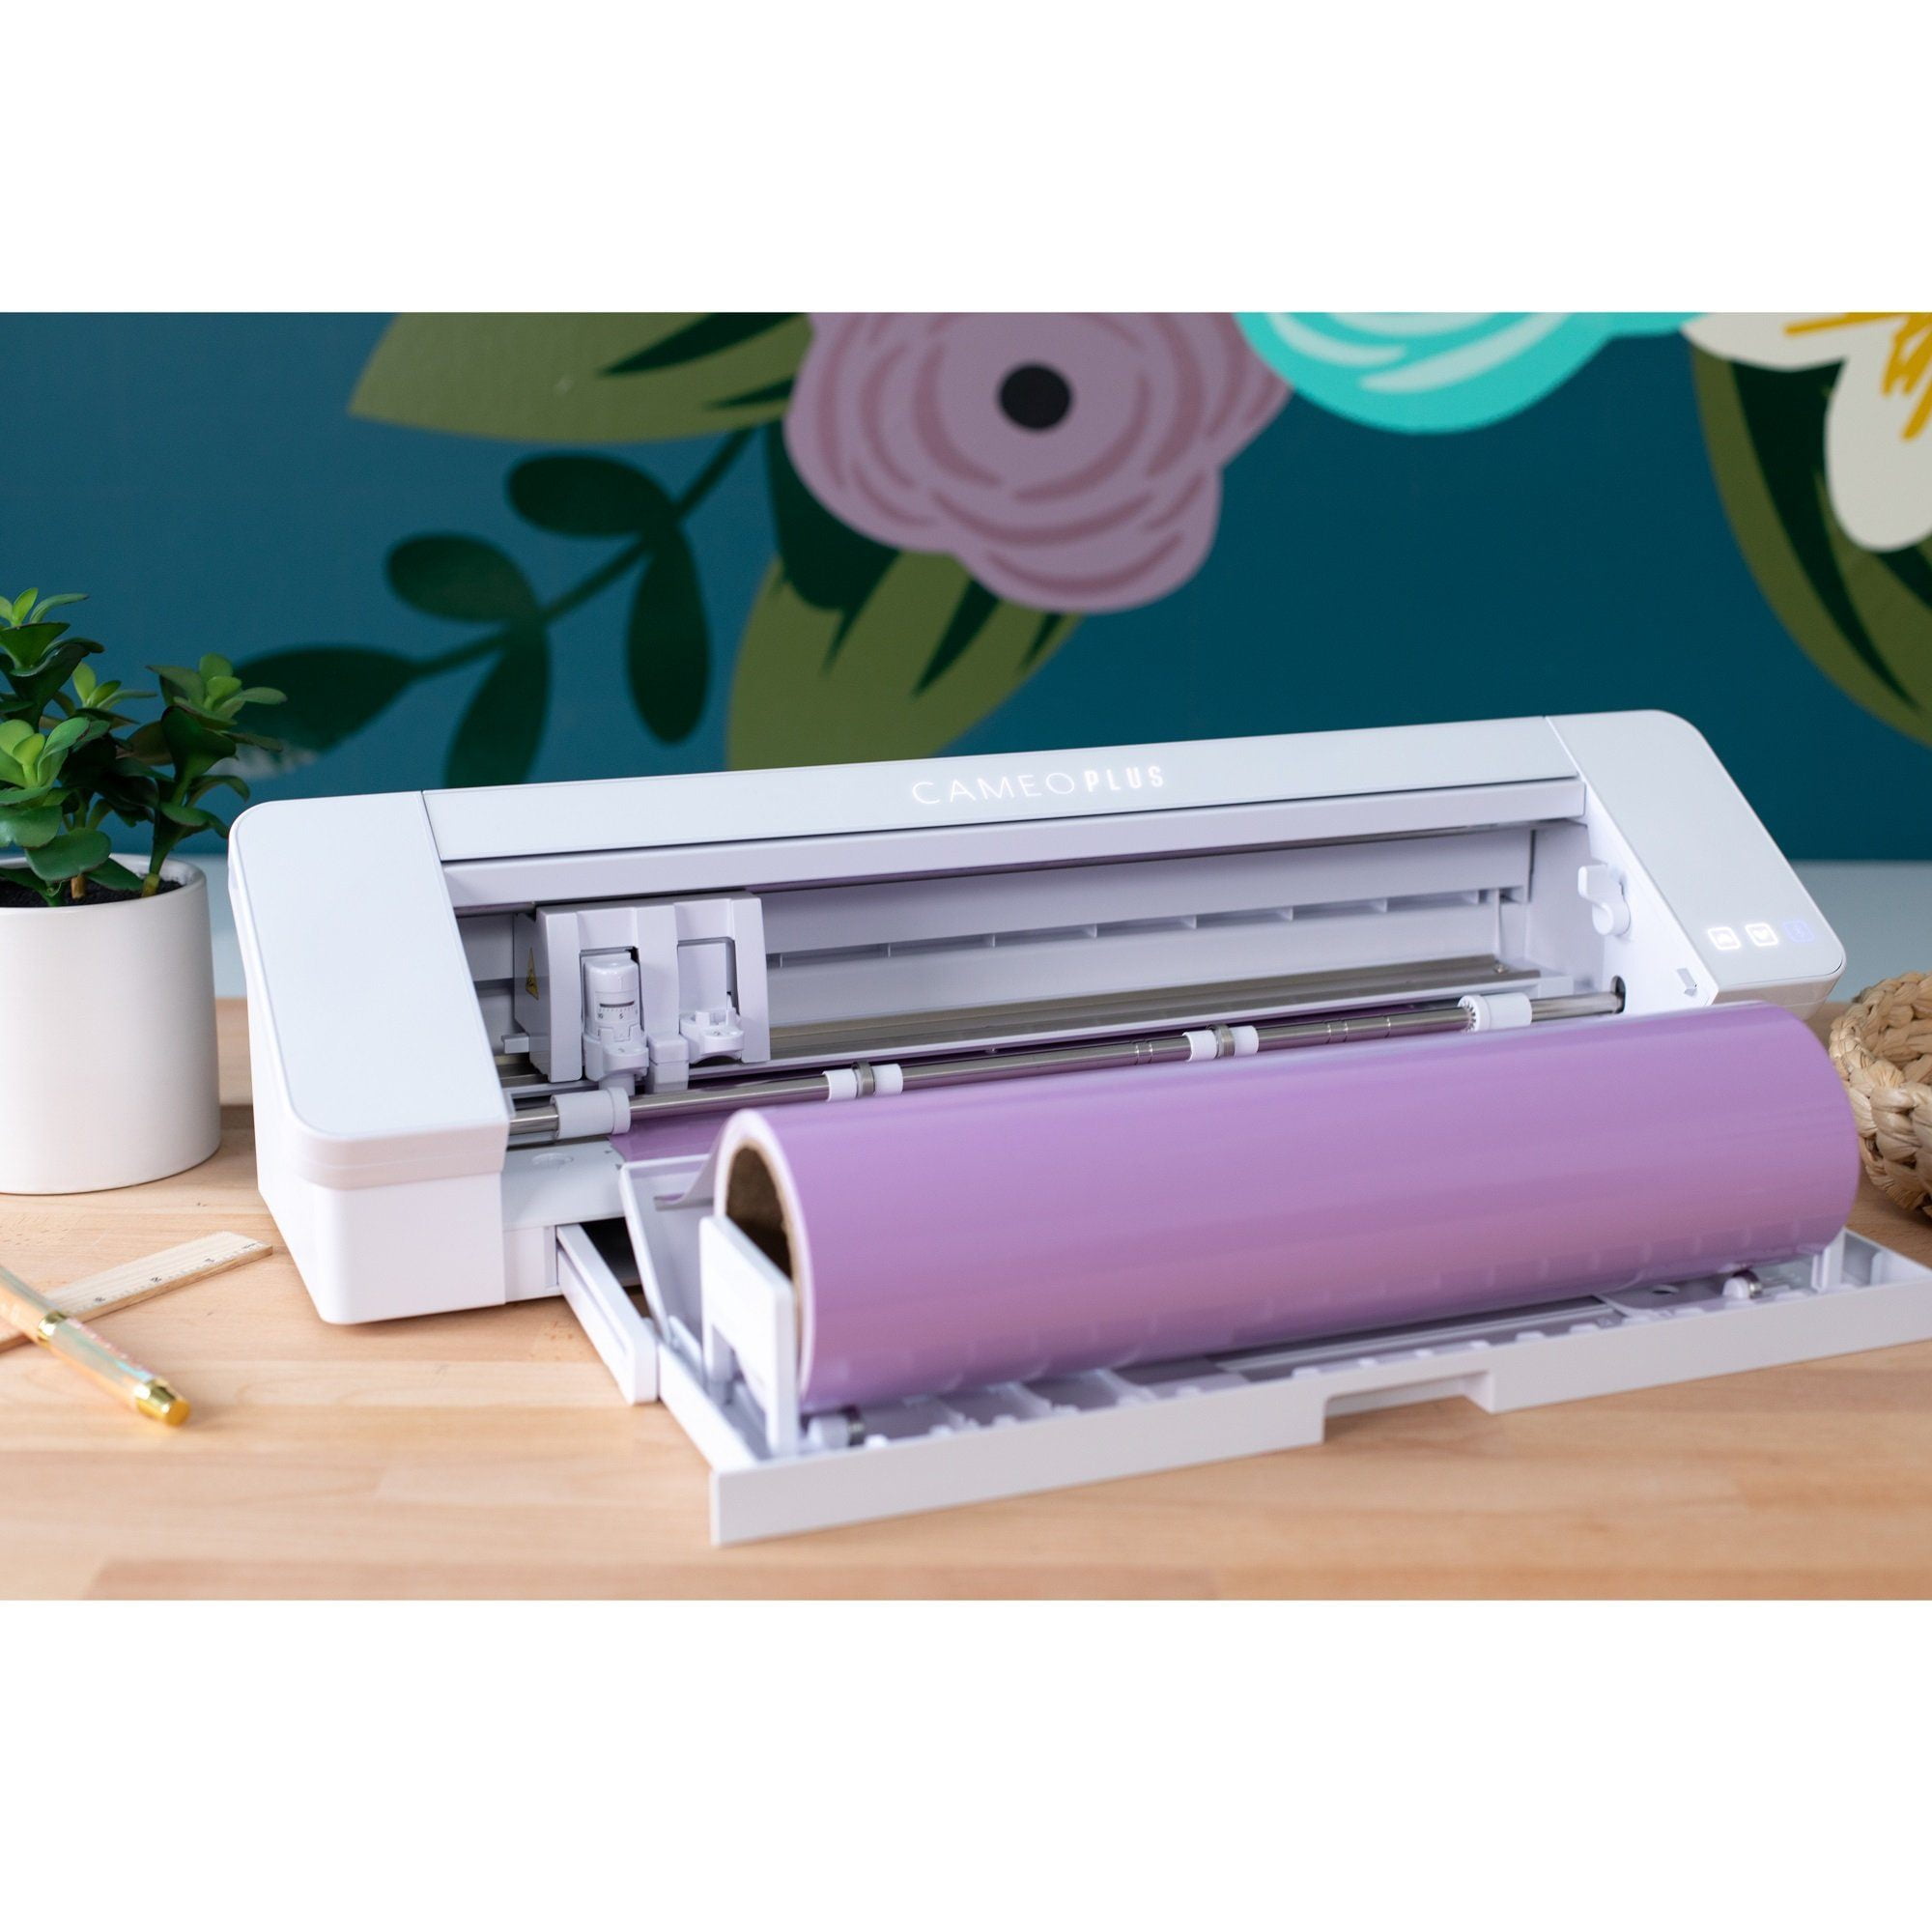 Silhouette Cameo 4 PLUS 15 with 38 Sheets Oracal Vinyl, HTV, Pens, Guides  